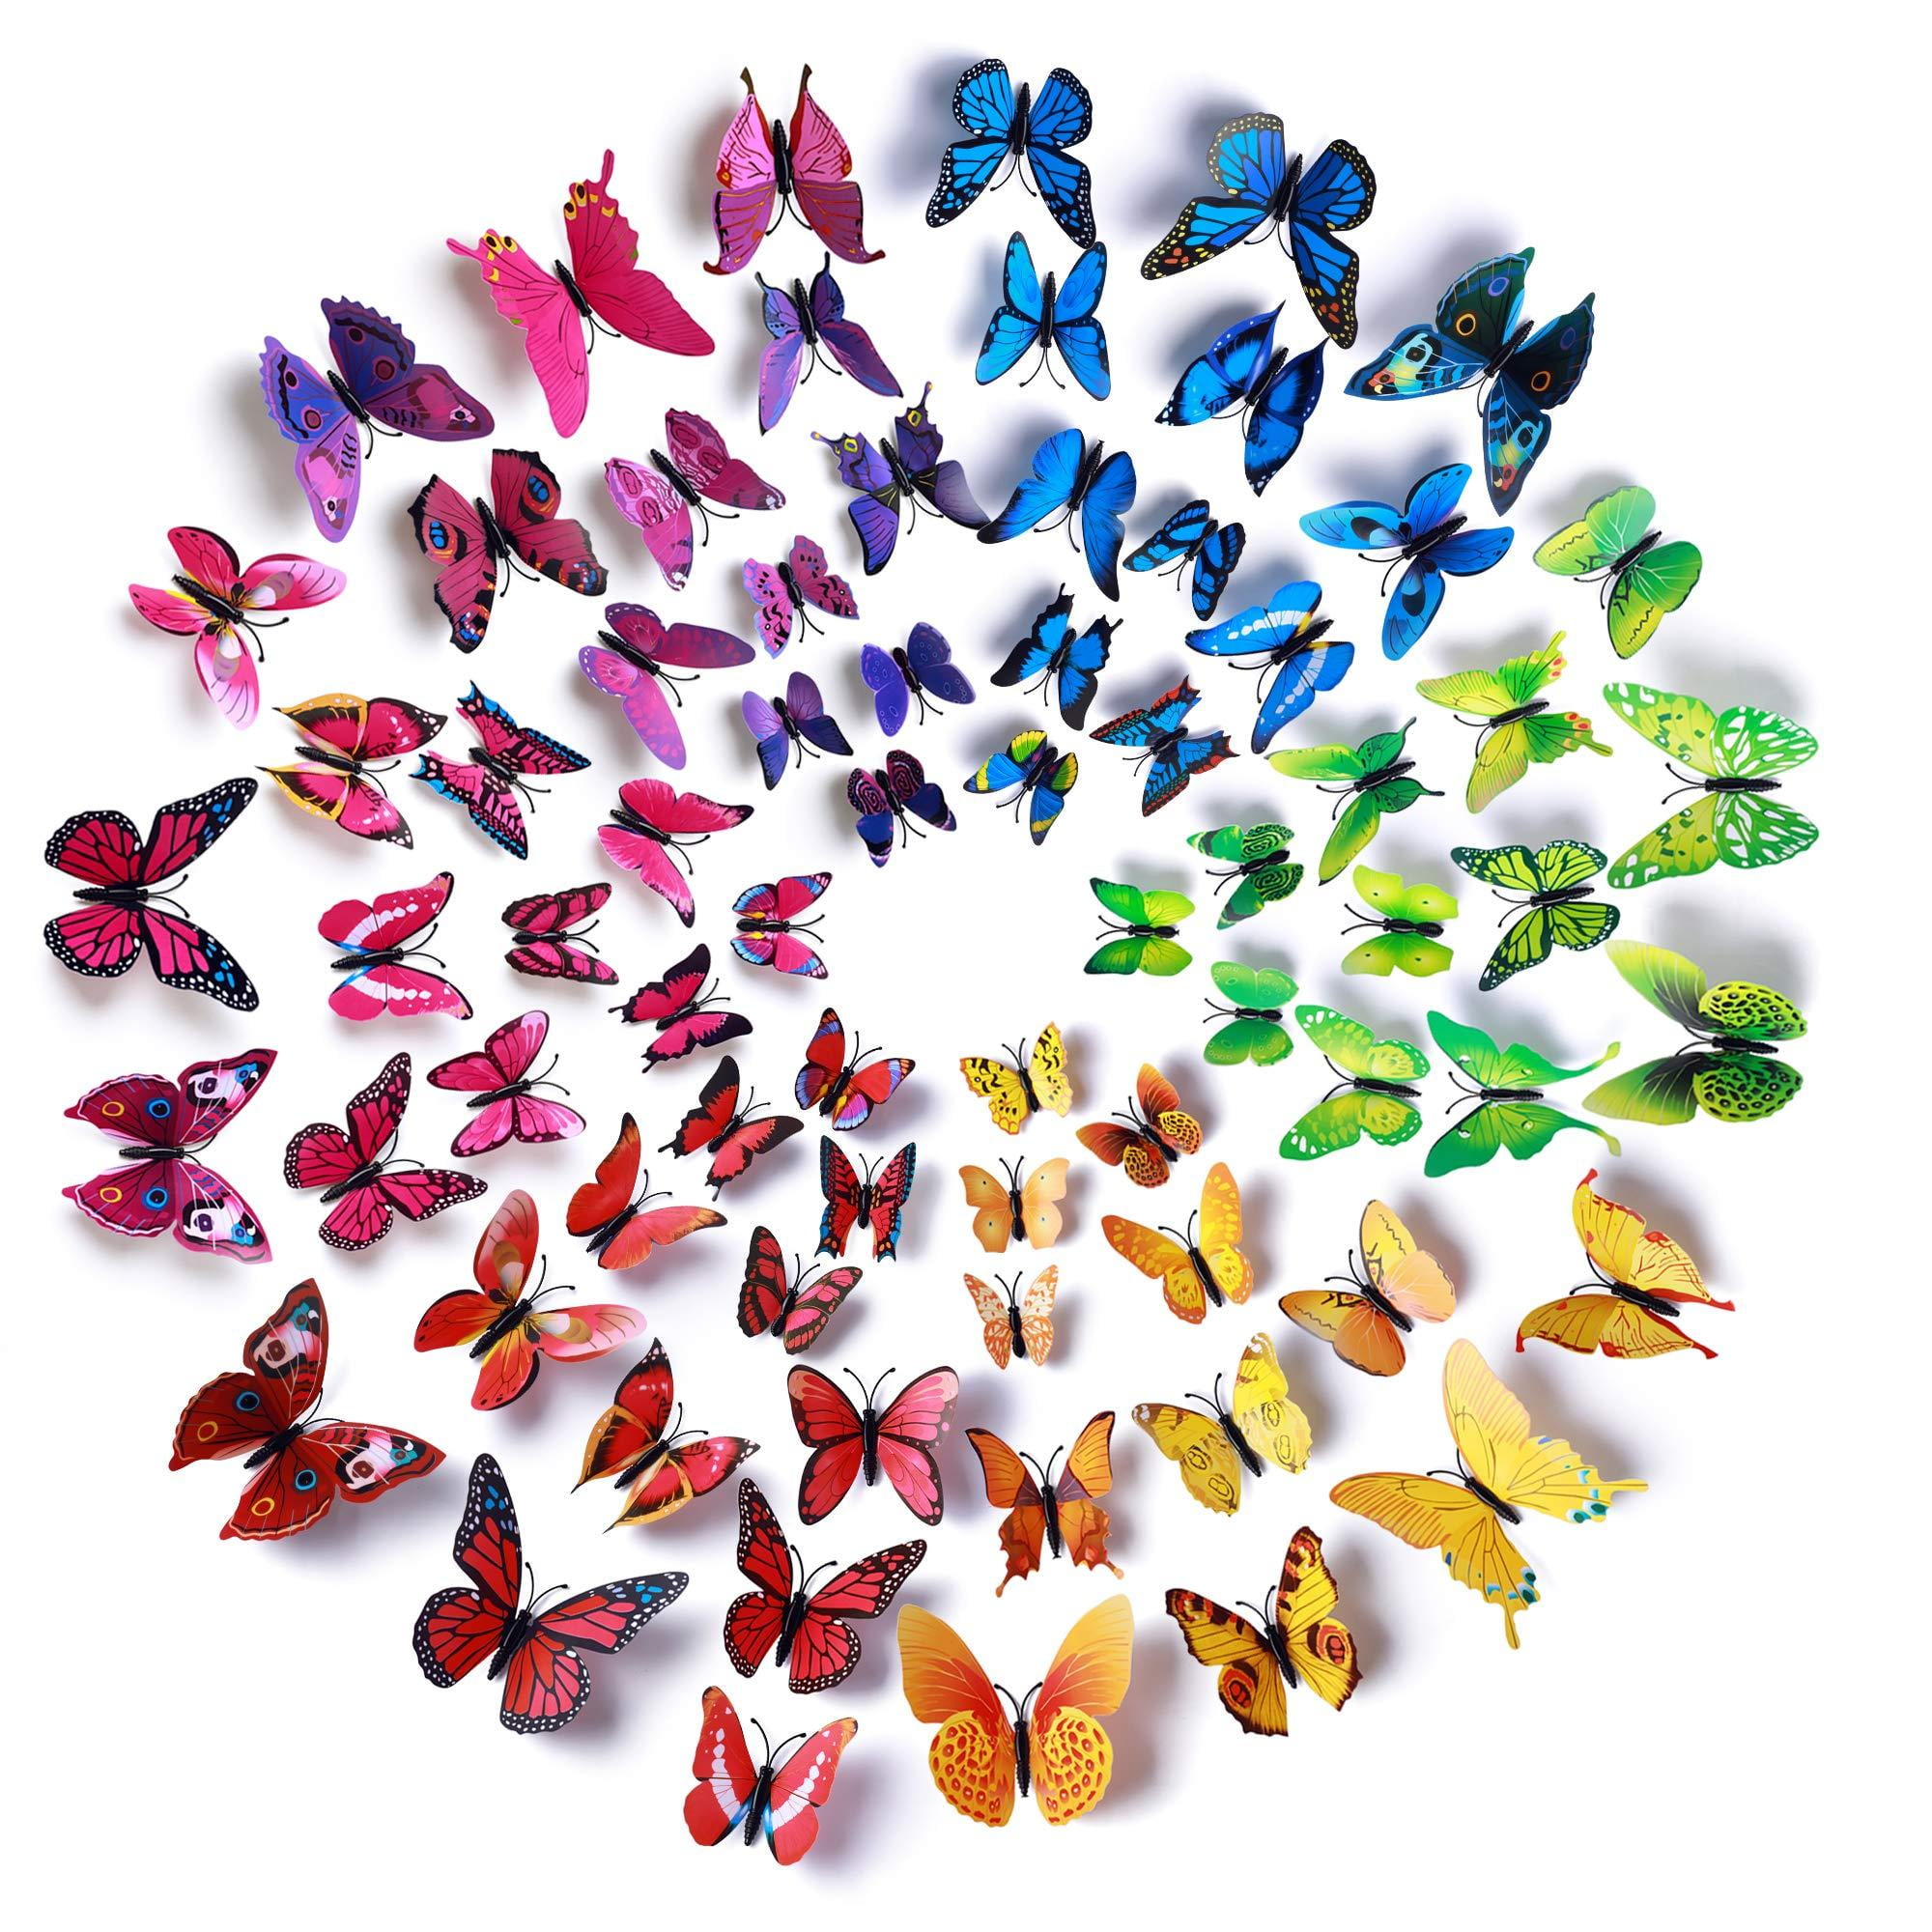 RuiChy 48pcs 3D Butterfly Wall Stickers Removable Butterflies Mural Decals DIY Decorative Wall Art Crafts for Home Kids Bedroom Wedding Decor